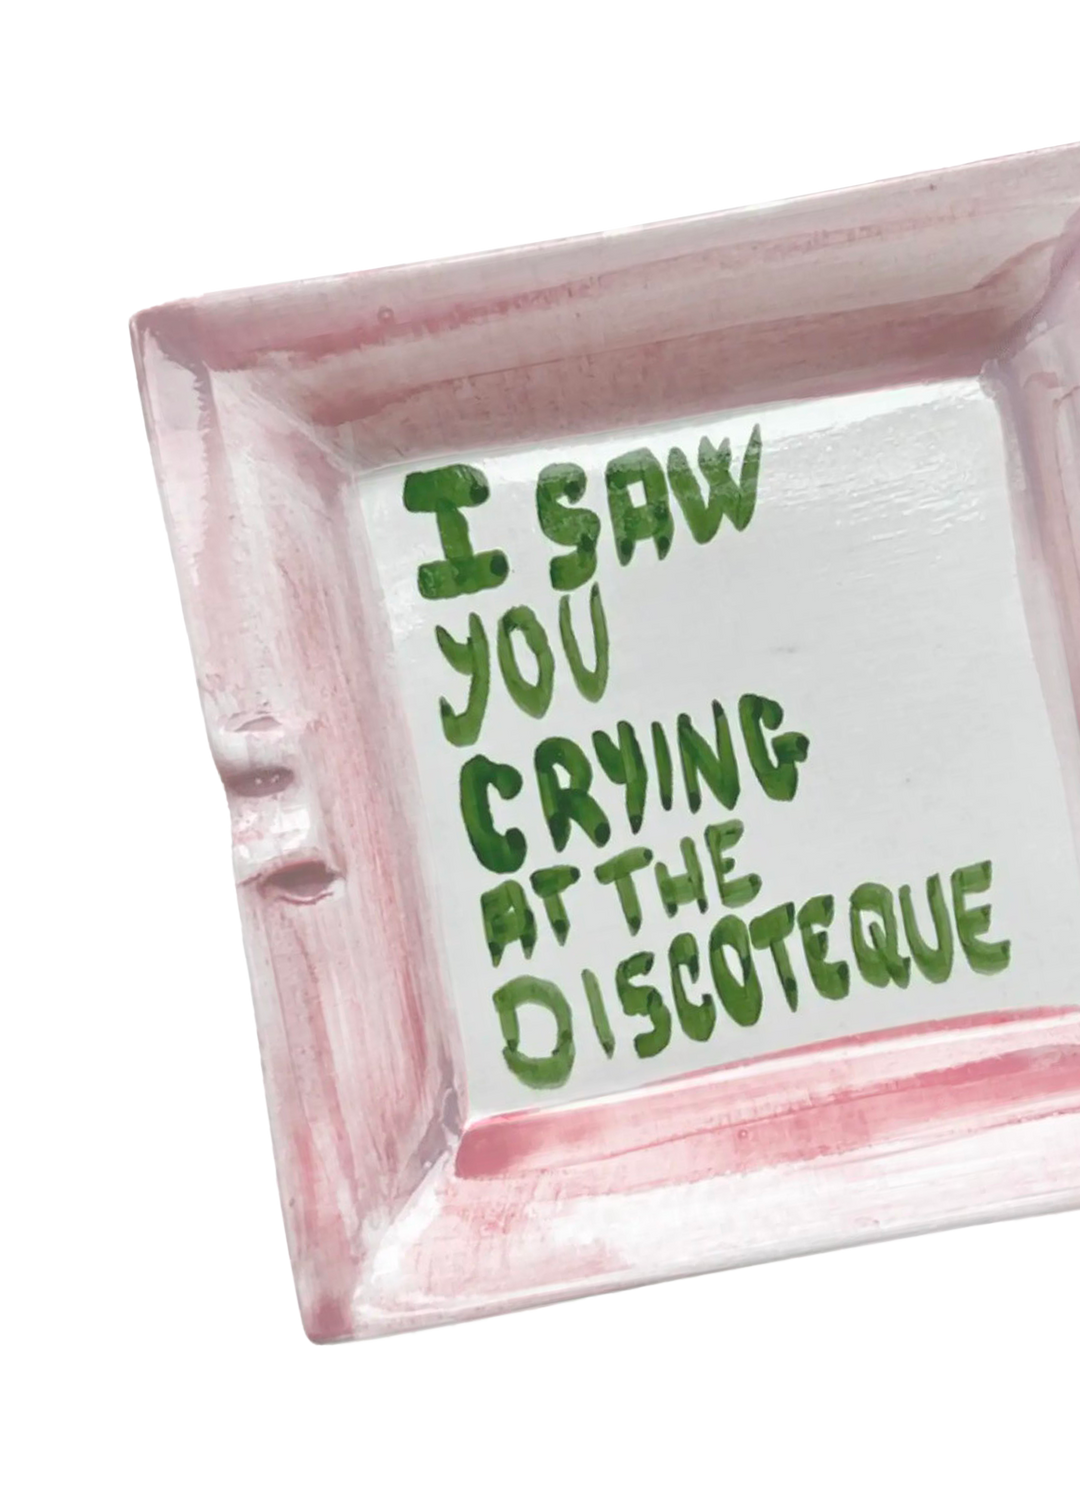 "I saw you crying at the discoteque" Ashtray